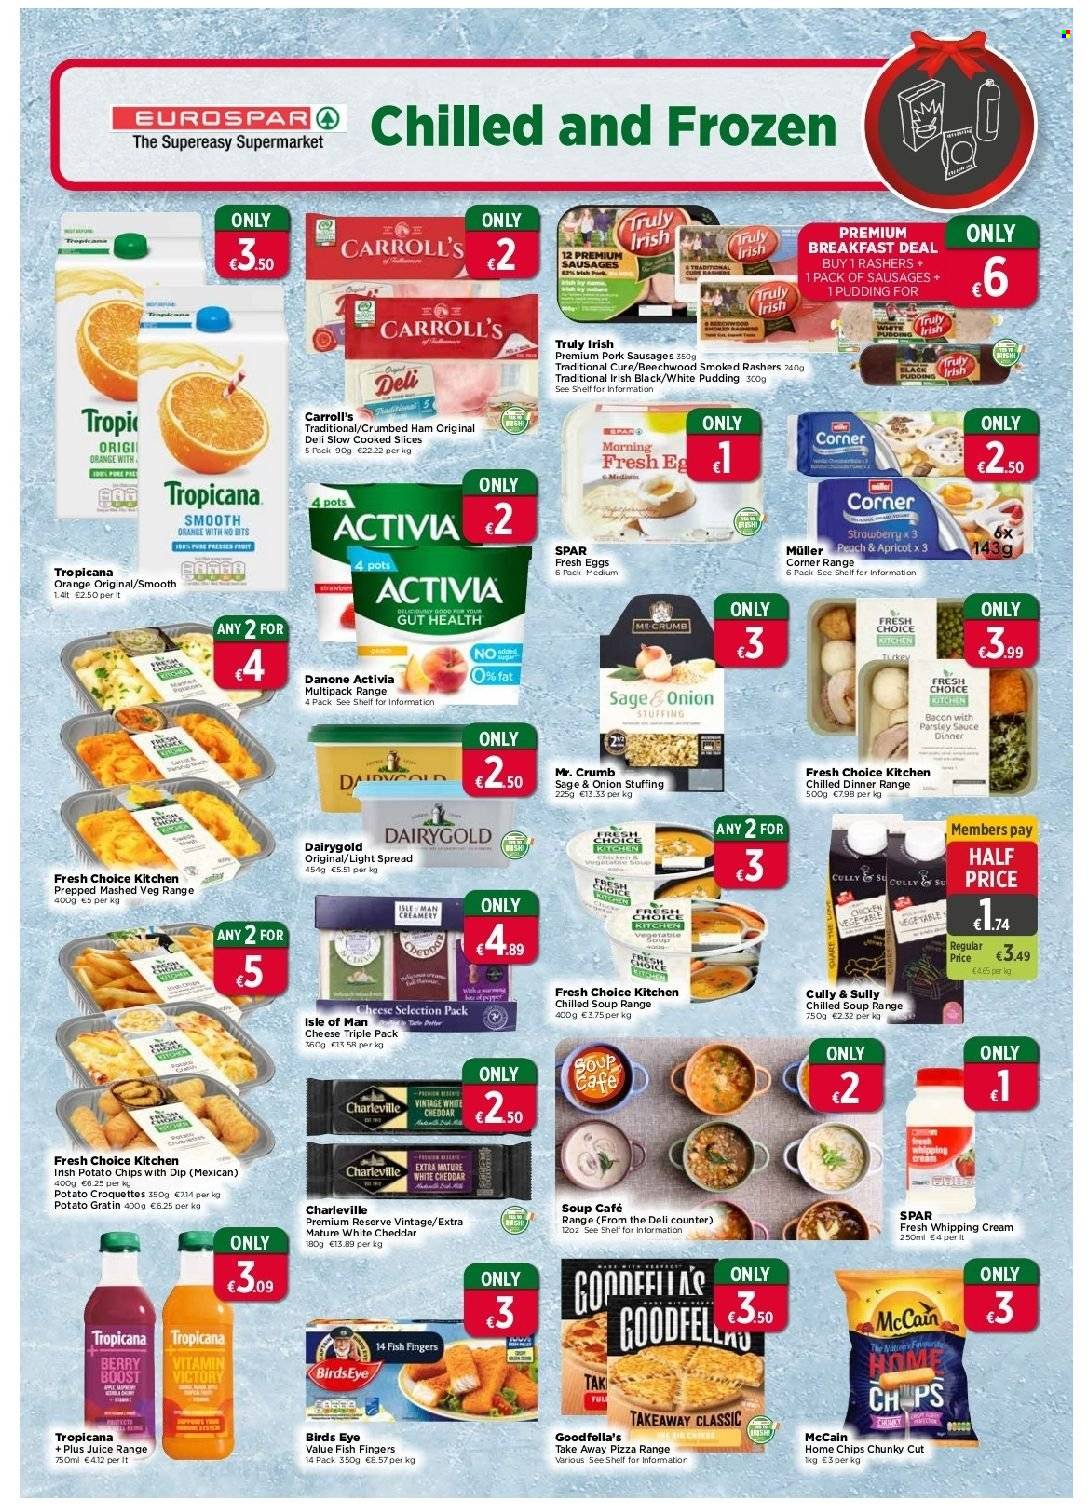 thumbnail - EUROSPAR offer  - 02.12.2021 - 29.12.2021 - Sales products - oranges, fish, fish fingers, fish sticks, pizza, soup, sauce, Bird's Eye, Fresh Choice Kitchen, bacon, ham, Truly Irish, sausage, pudding, Danone, Müller, Activia, eggs, whipping cream, dip, McCain, frozen chips, potato chips, juice, Boost, TRULY, Miller, pot. Page 5.